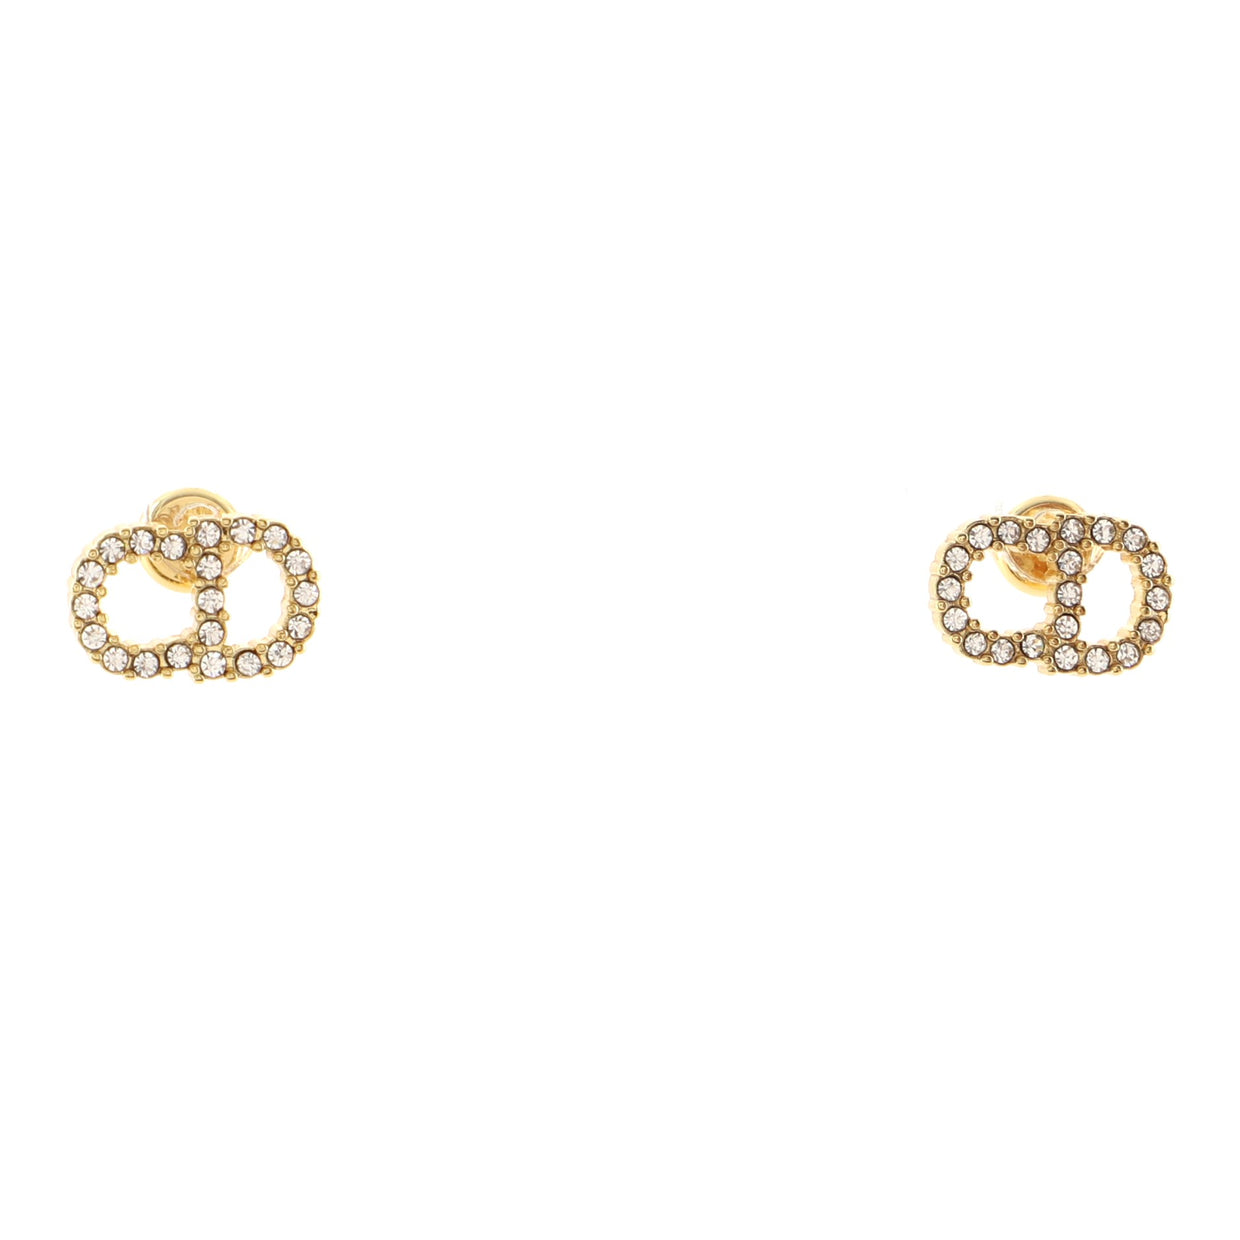 Christian Dior Clair D Lune Stud Earrings Metal with Crystals Gold 7973814